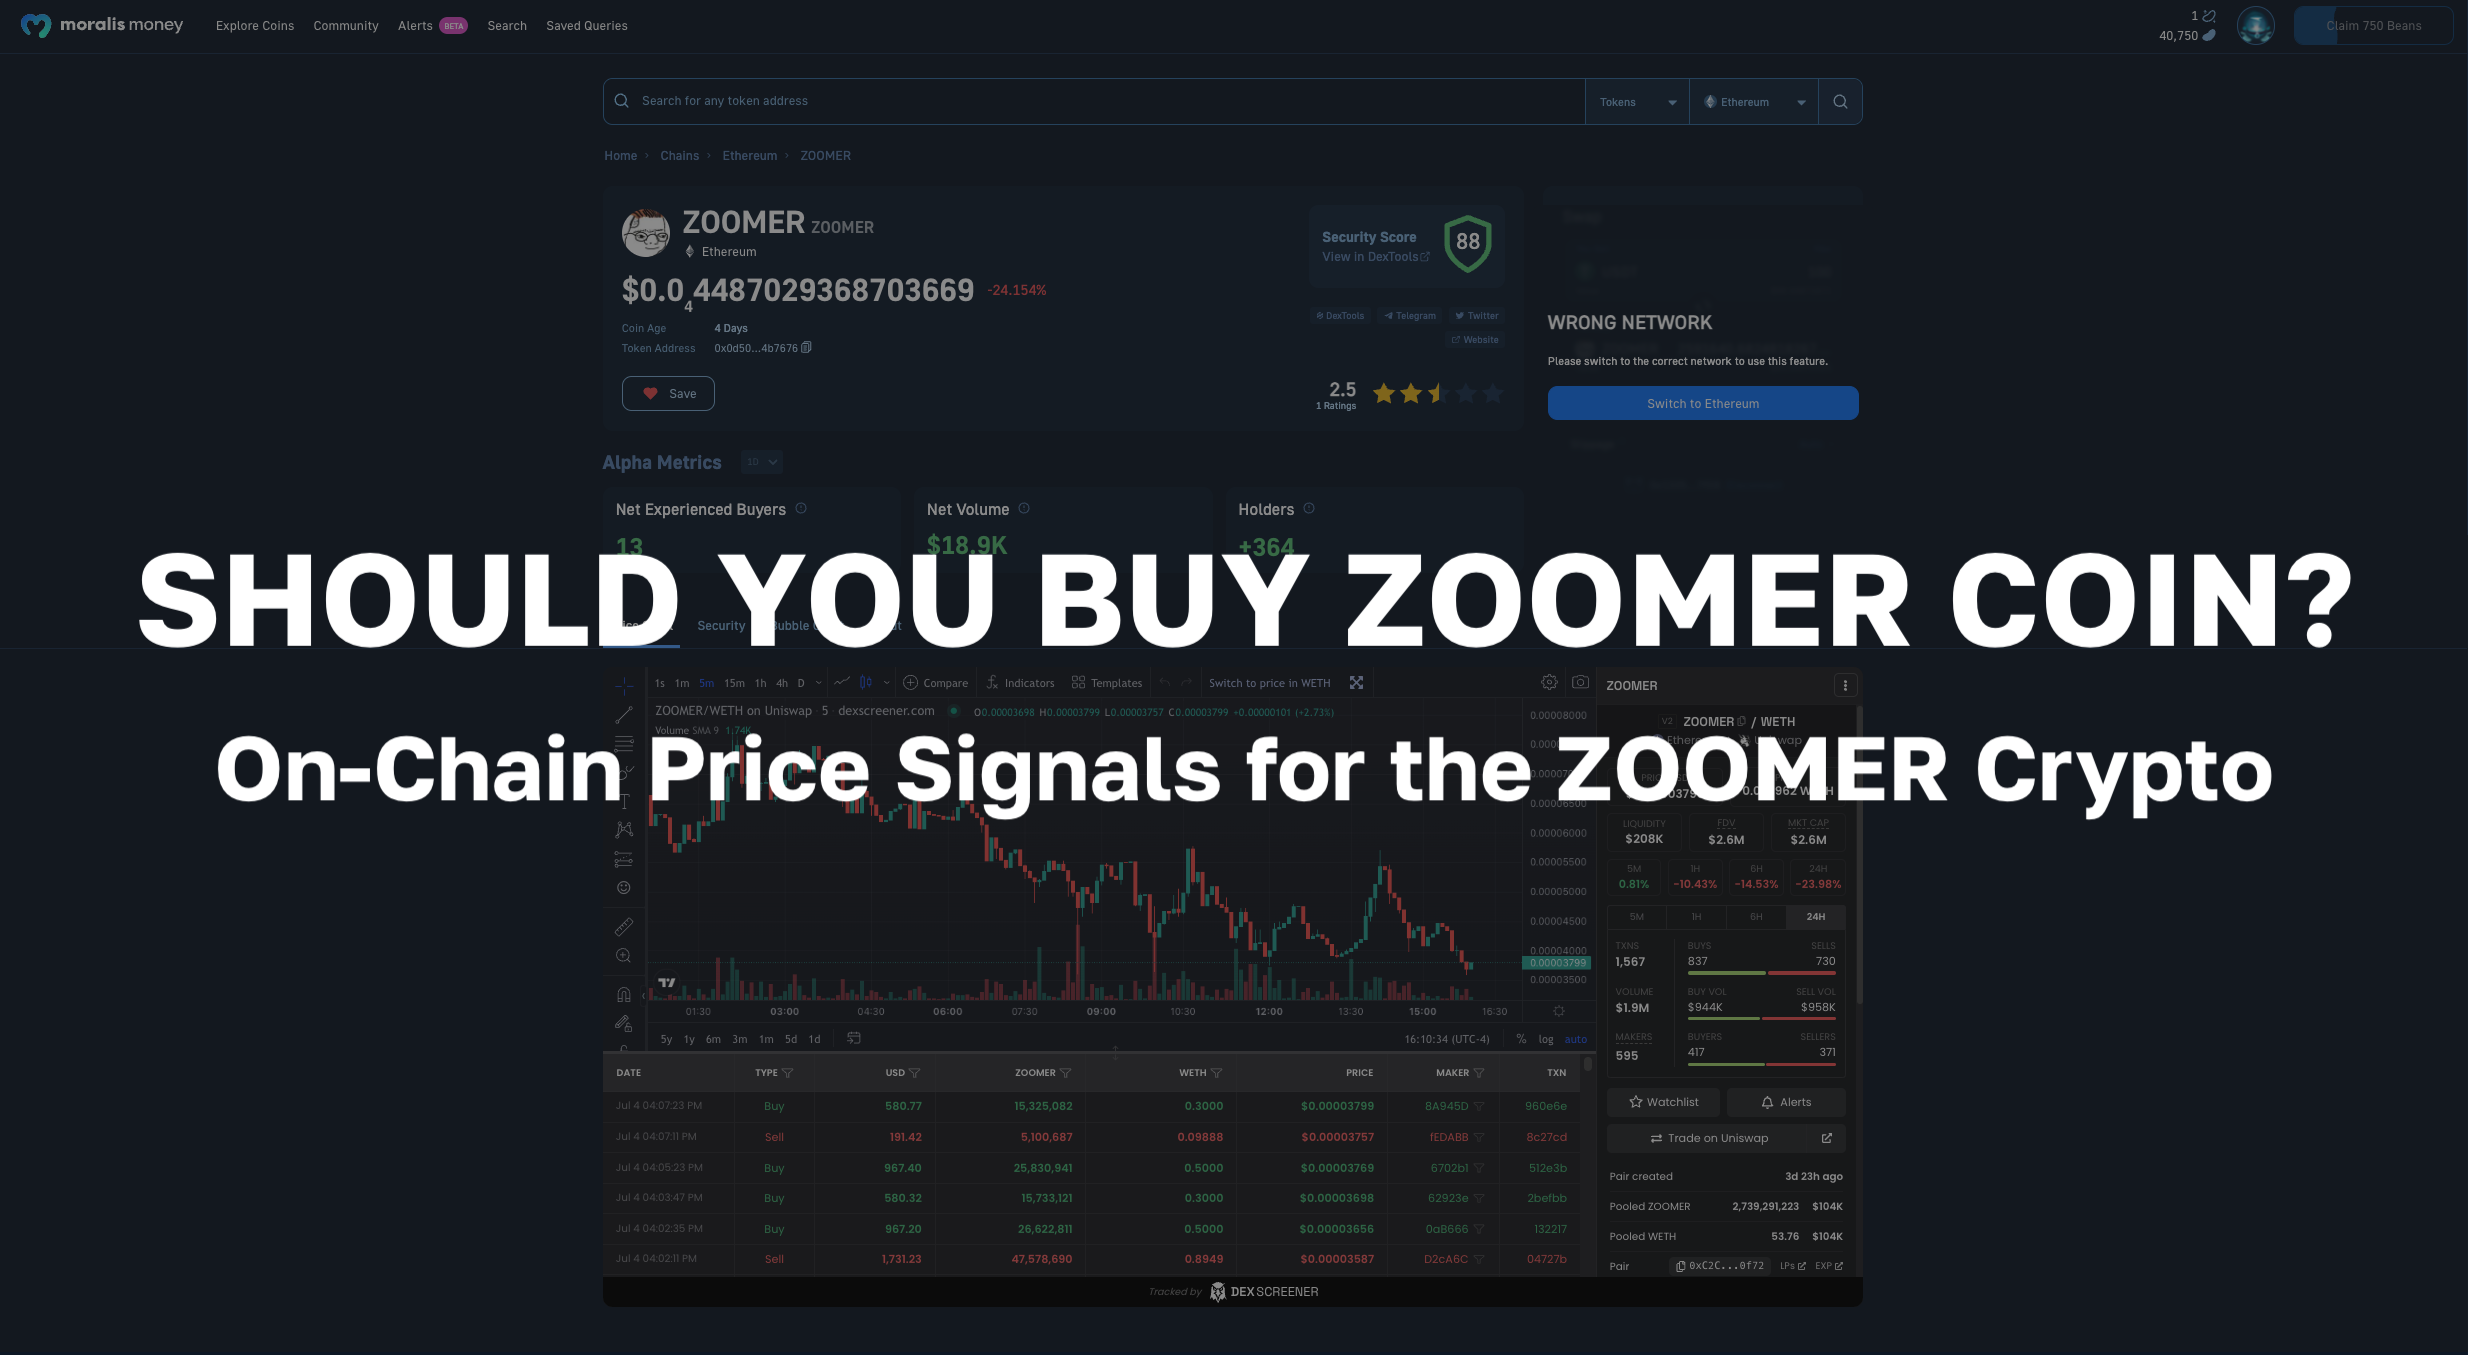 Should You Buy the Zoomer Coin? On-Chain Price Signals for the ZOOMER Crypto